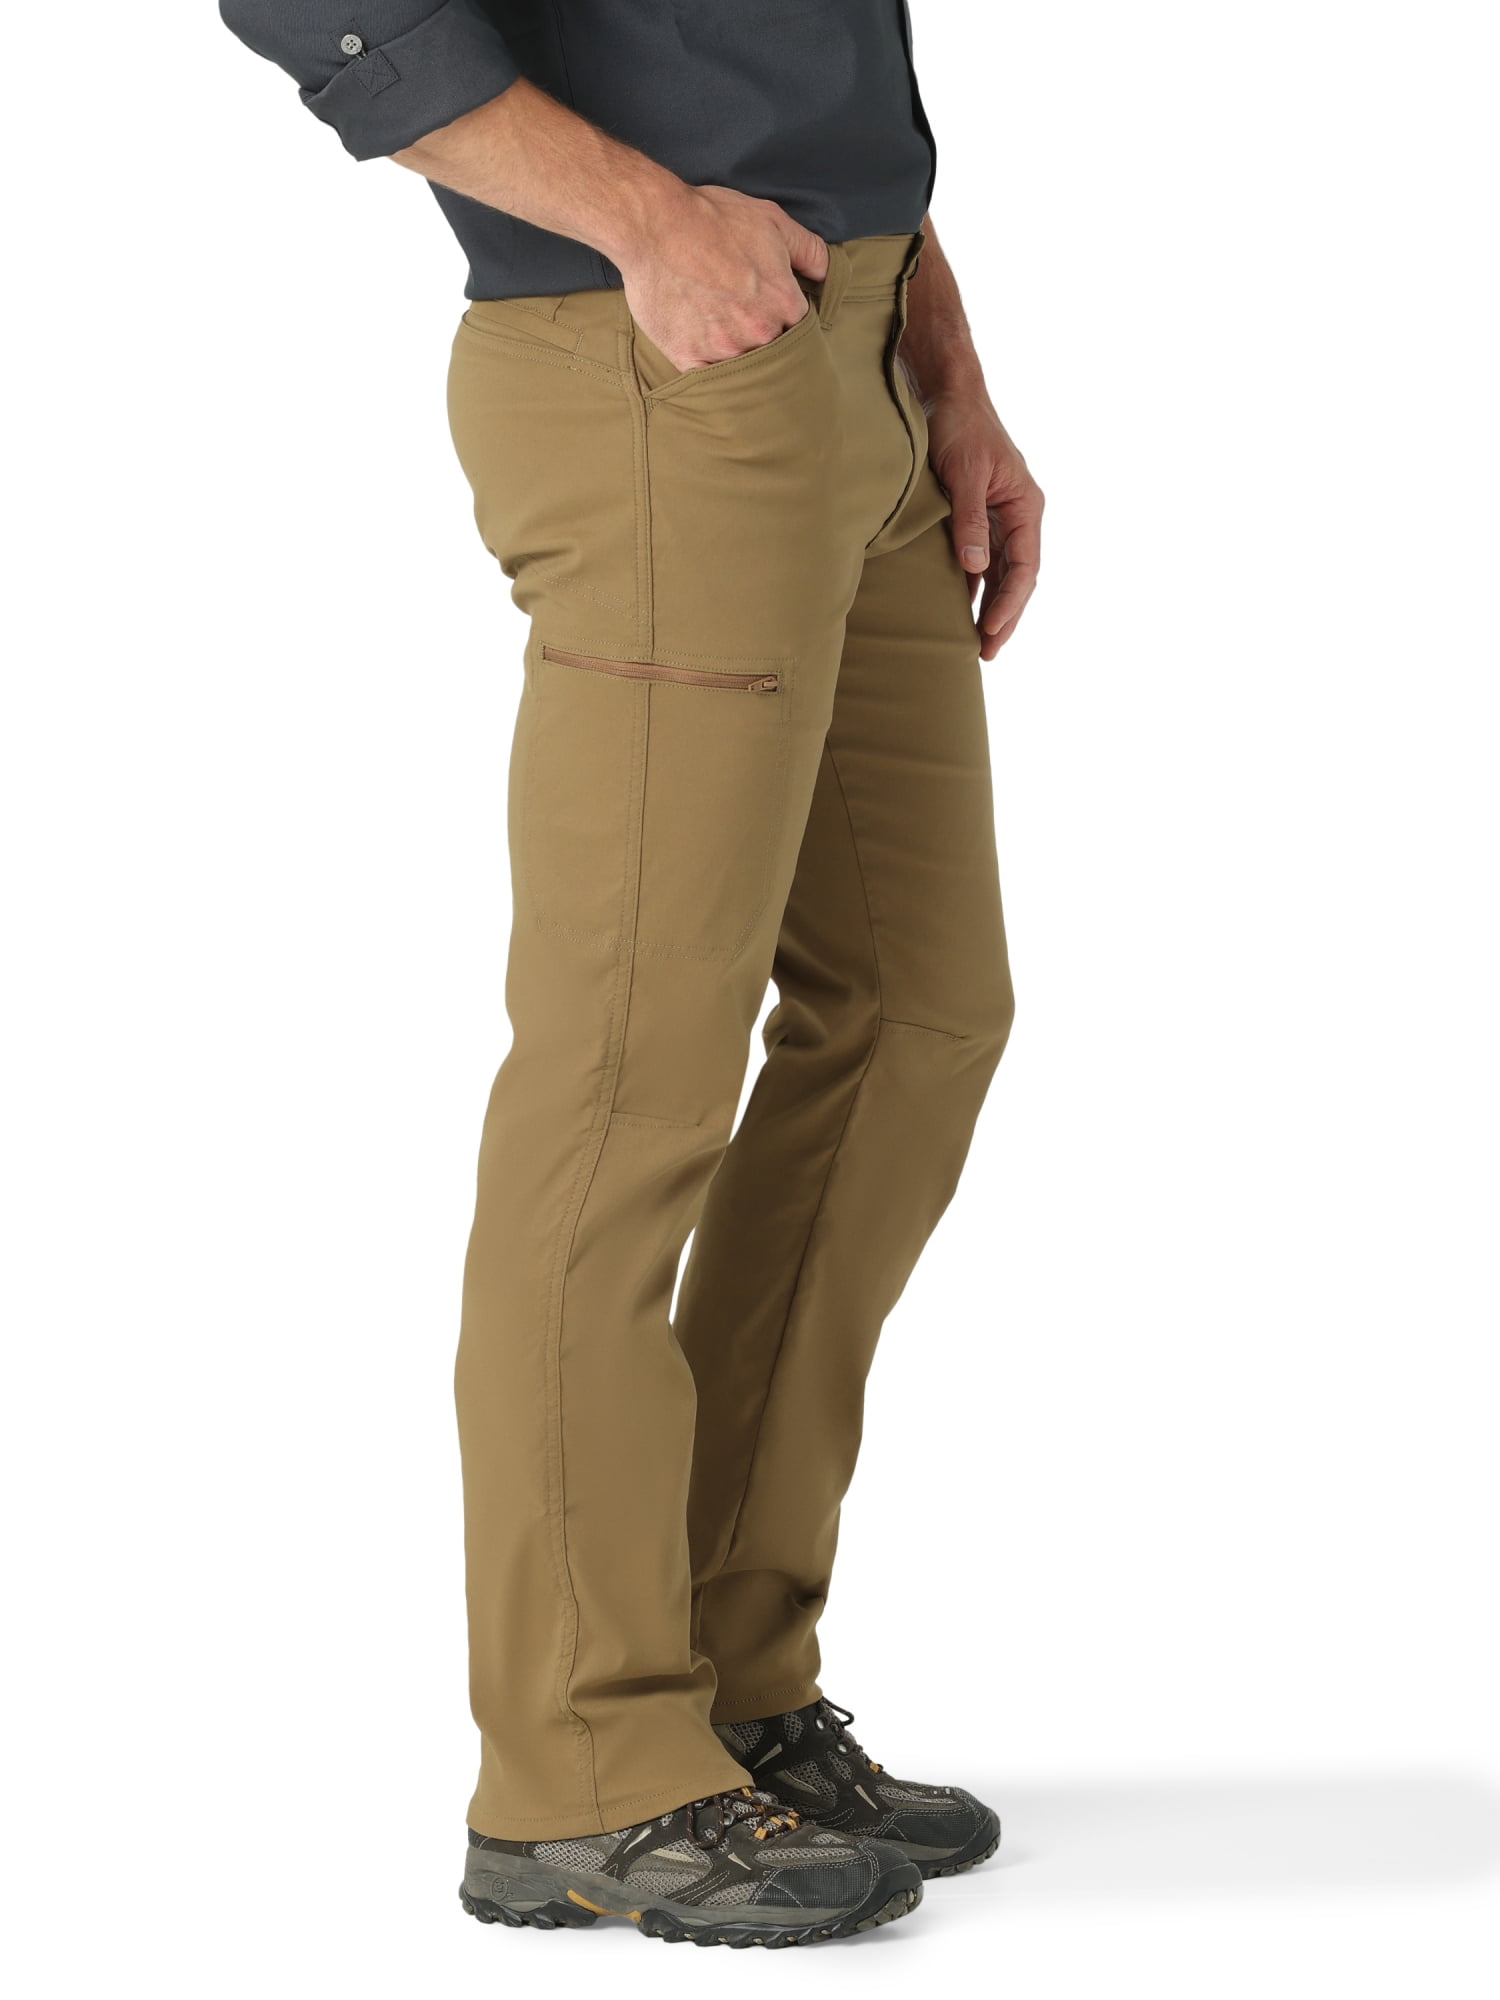 Buy Wrangler Authentics Men's Relaxed Fit Stretch Cargo Pant, Travertine  Ripstop, 38W x 29L at Amazon.in